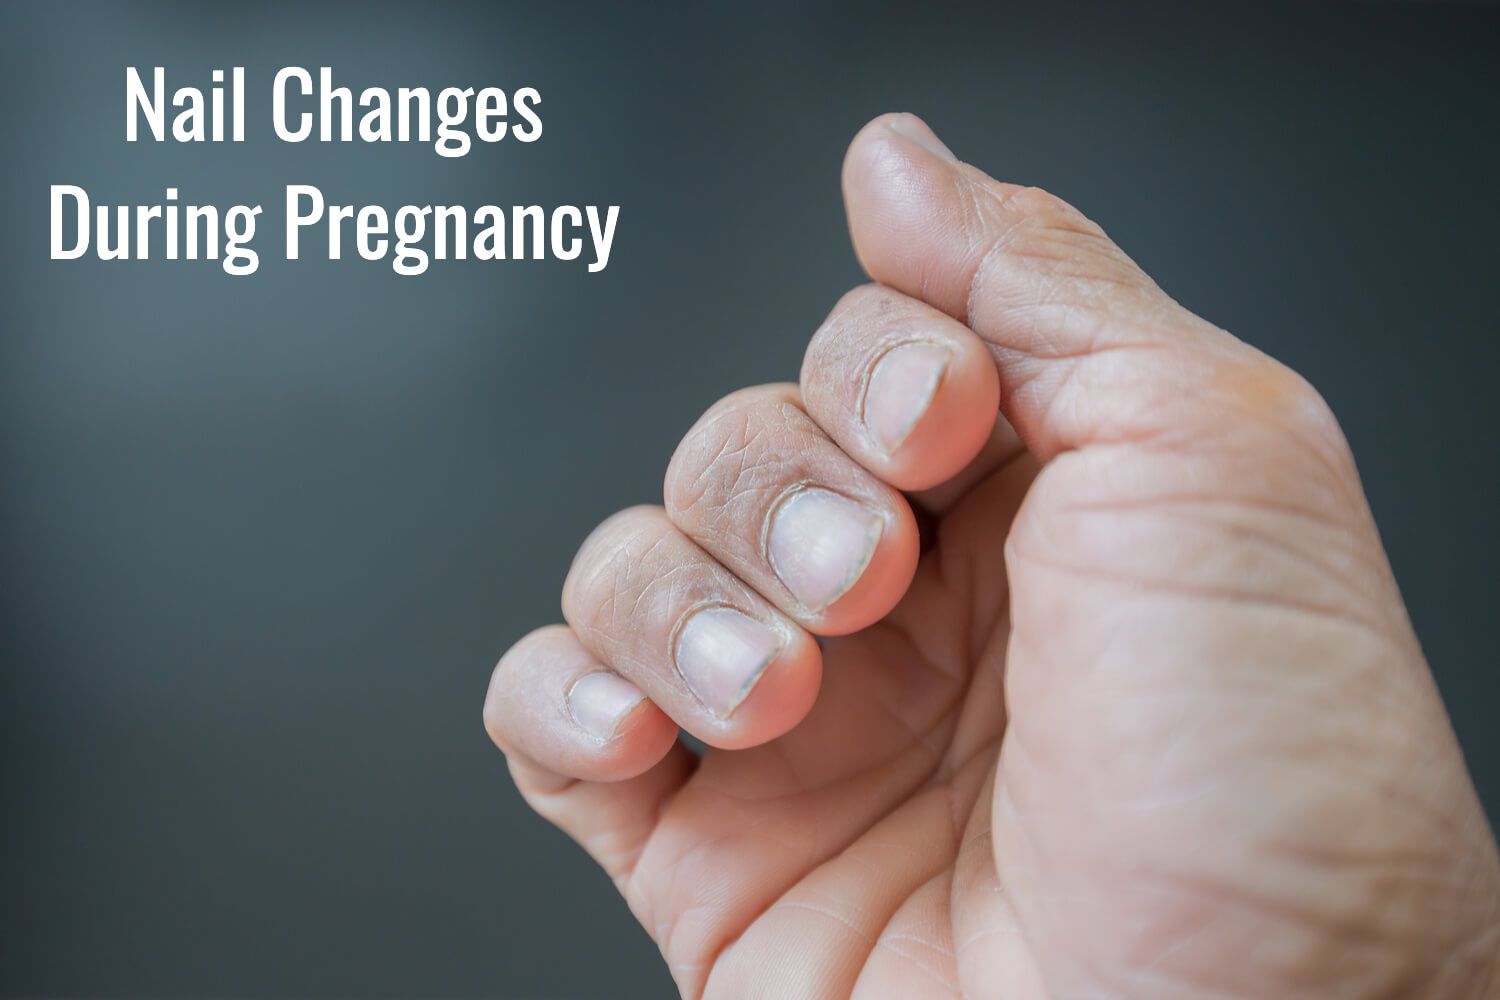 Nail Changes During Pregnancy – Causes and Treatment